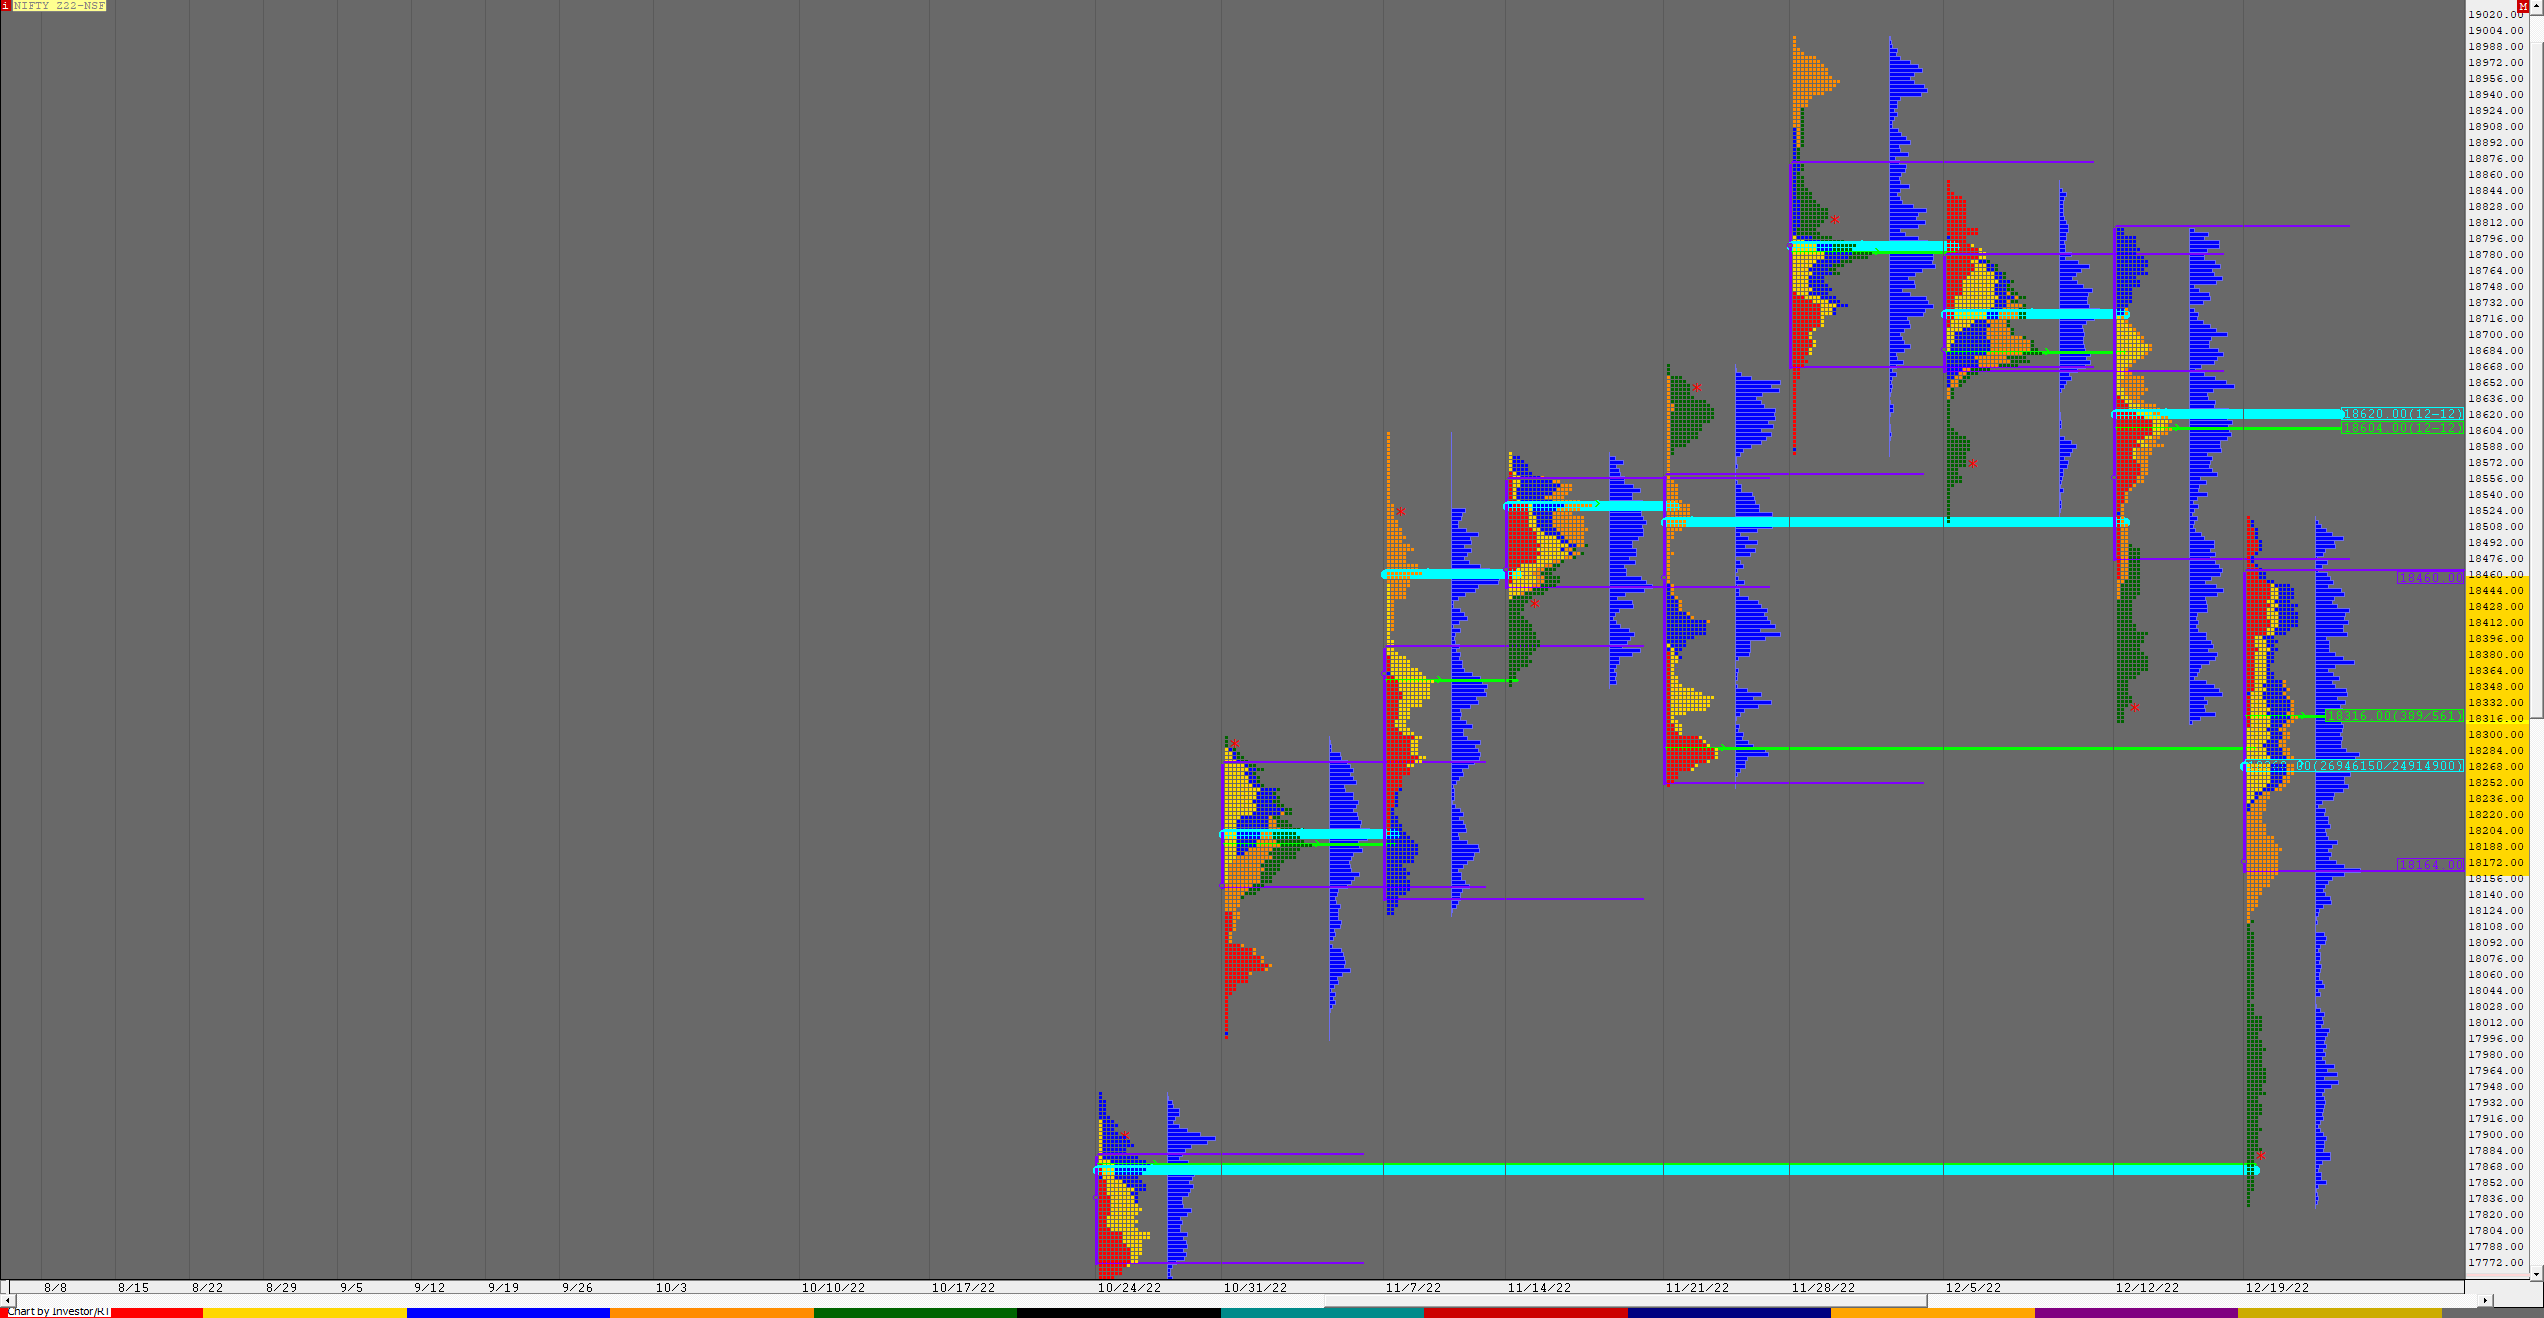 Nf F 3 Weekly Charts (19Th To 23Rd Dec 2022) And Market Profile Analysis Banknifty Futures, Charts, Day Trading, Intraday Trading, Intraday Trading Strategies, Market Profile, Market Profile Trading Strategies, Nifty Futures, Order Flow Analysis, Support And Resistance, Technical Analysis, Trading Strategies, Volume Profile Trading